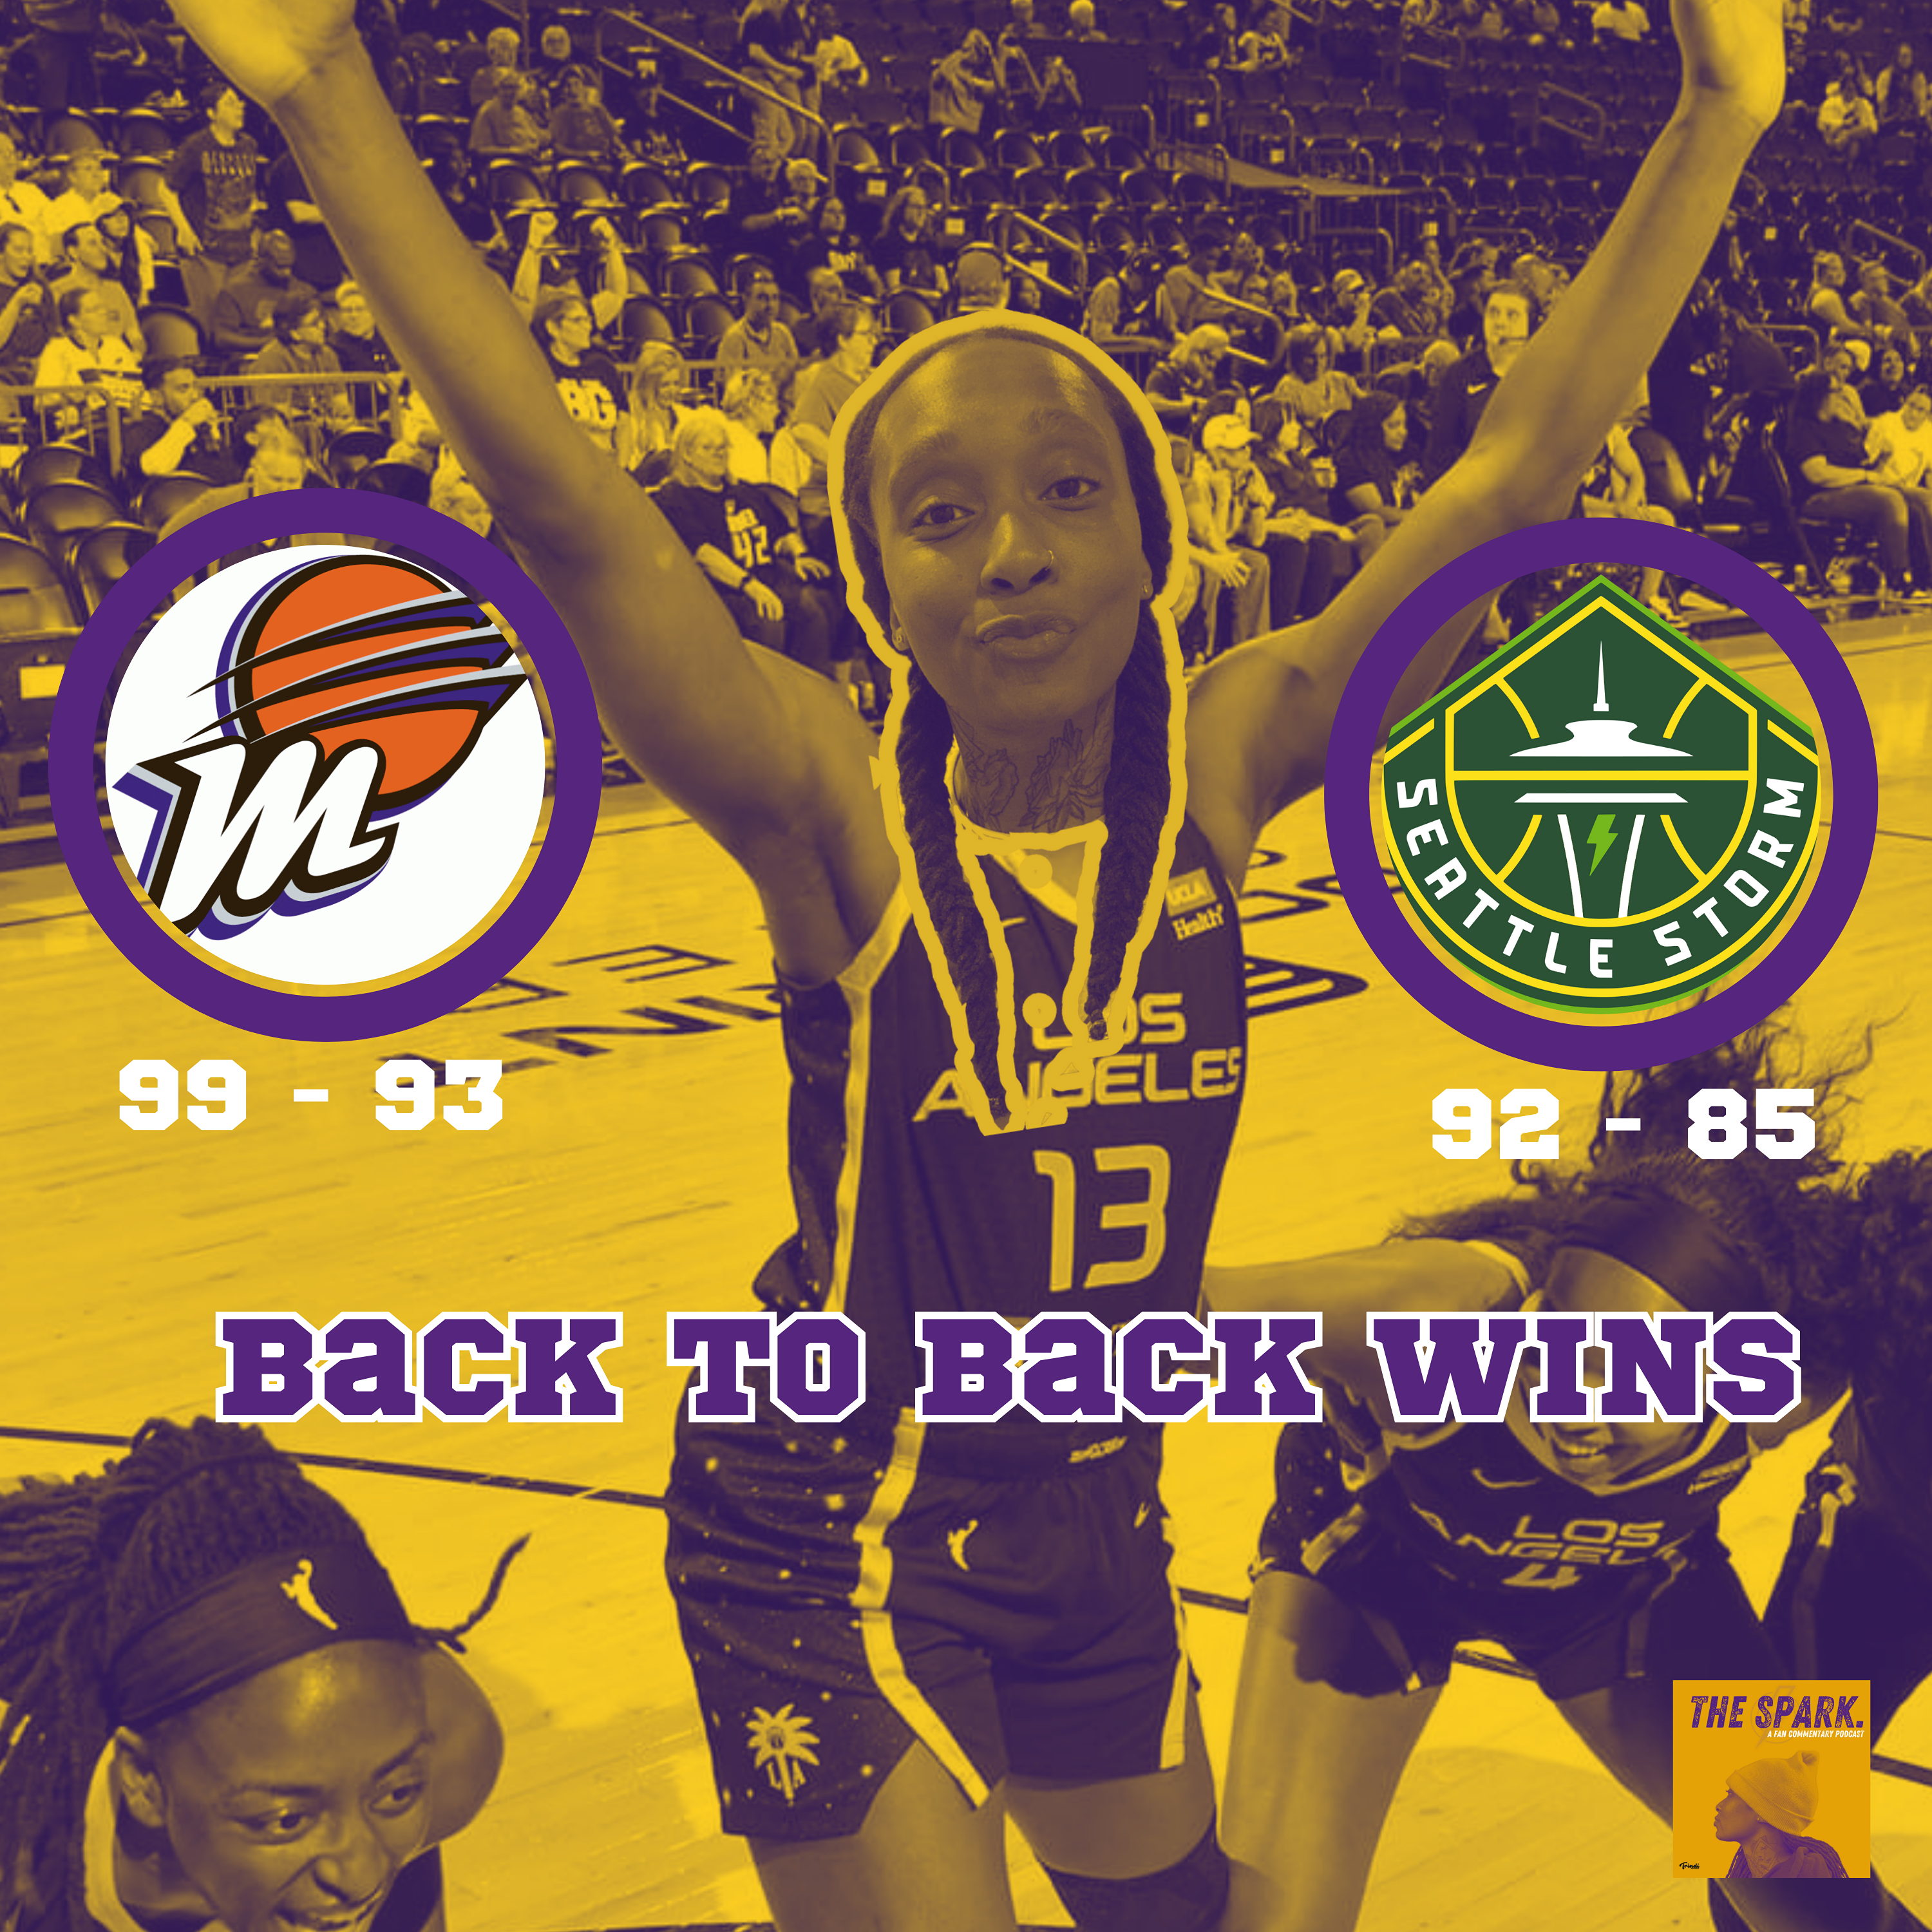 #LASparks Back To Back WINS and Move to 3-2 Season